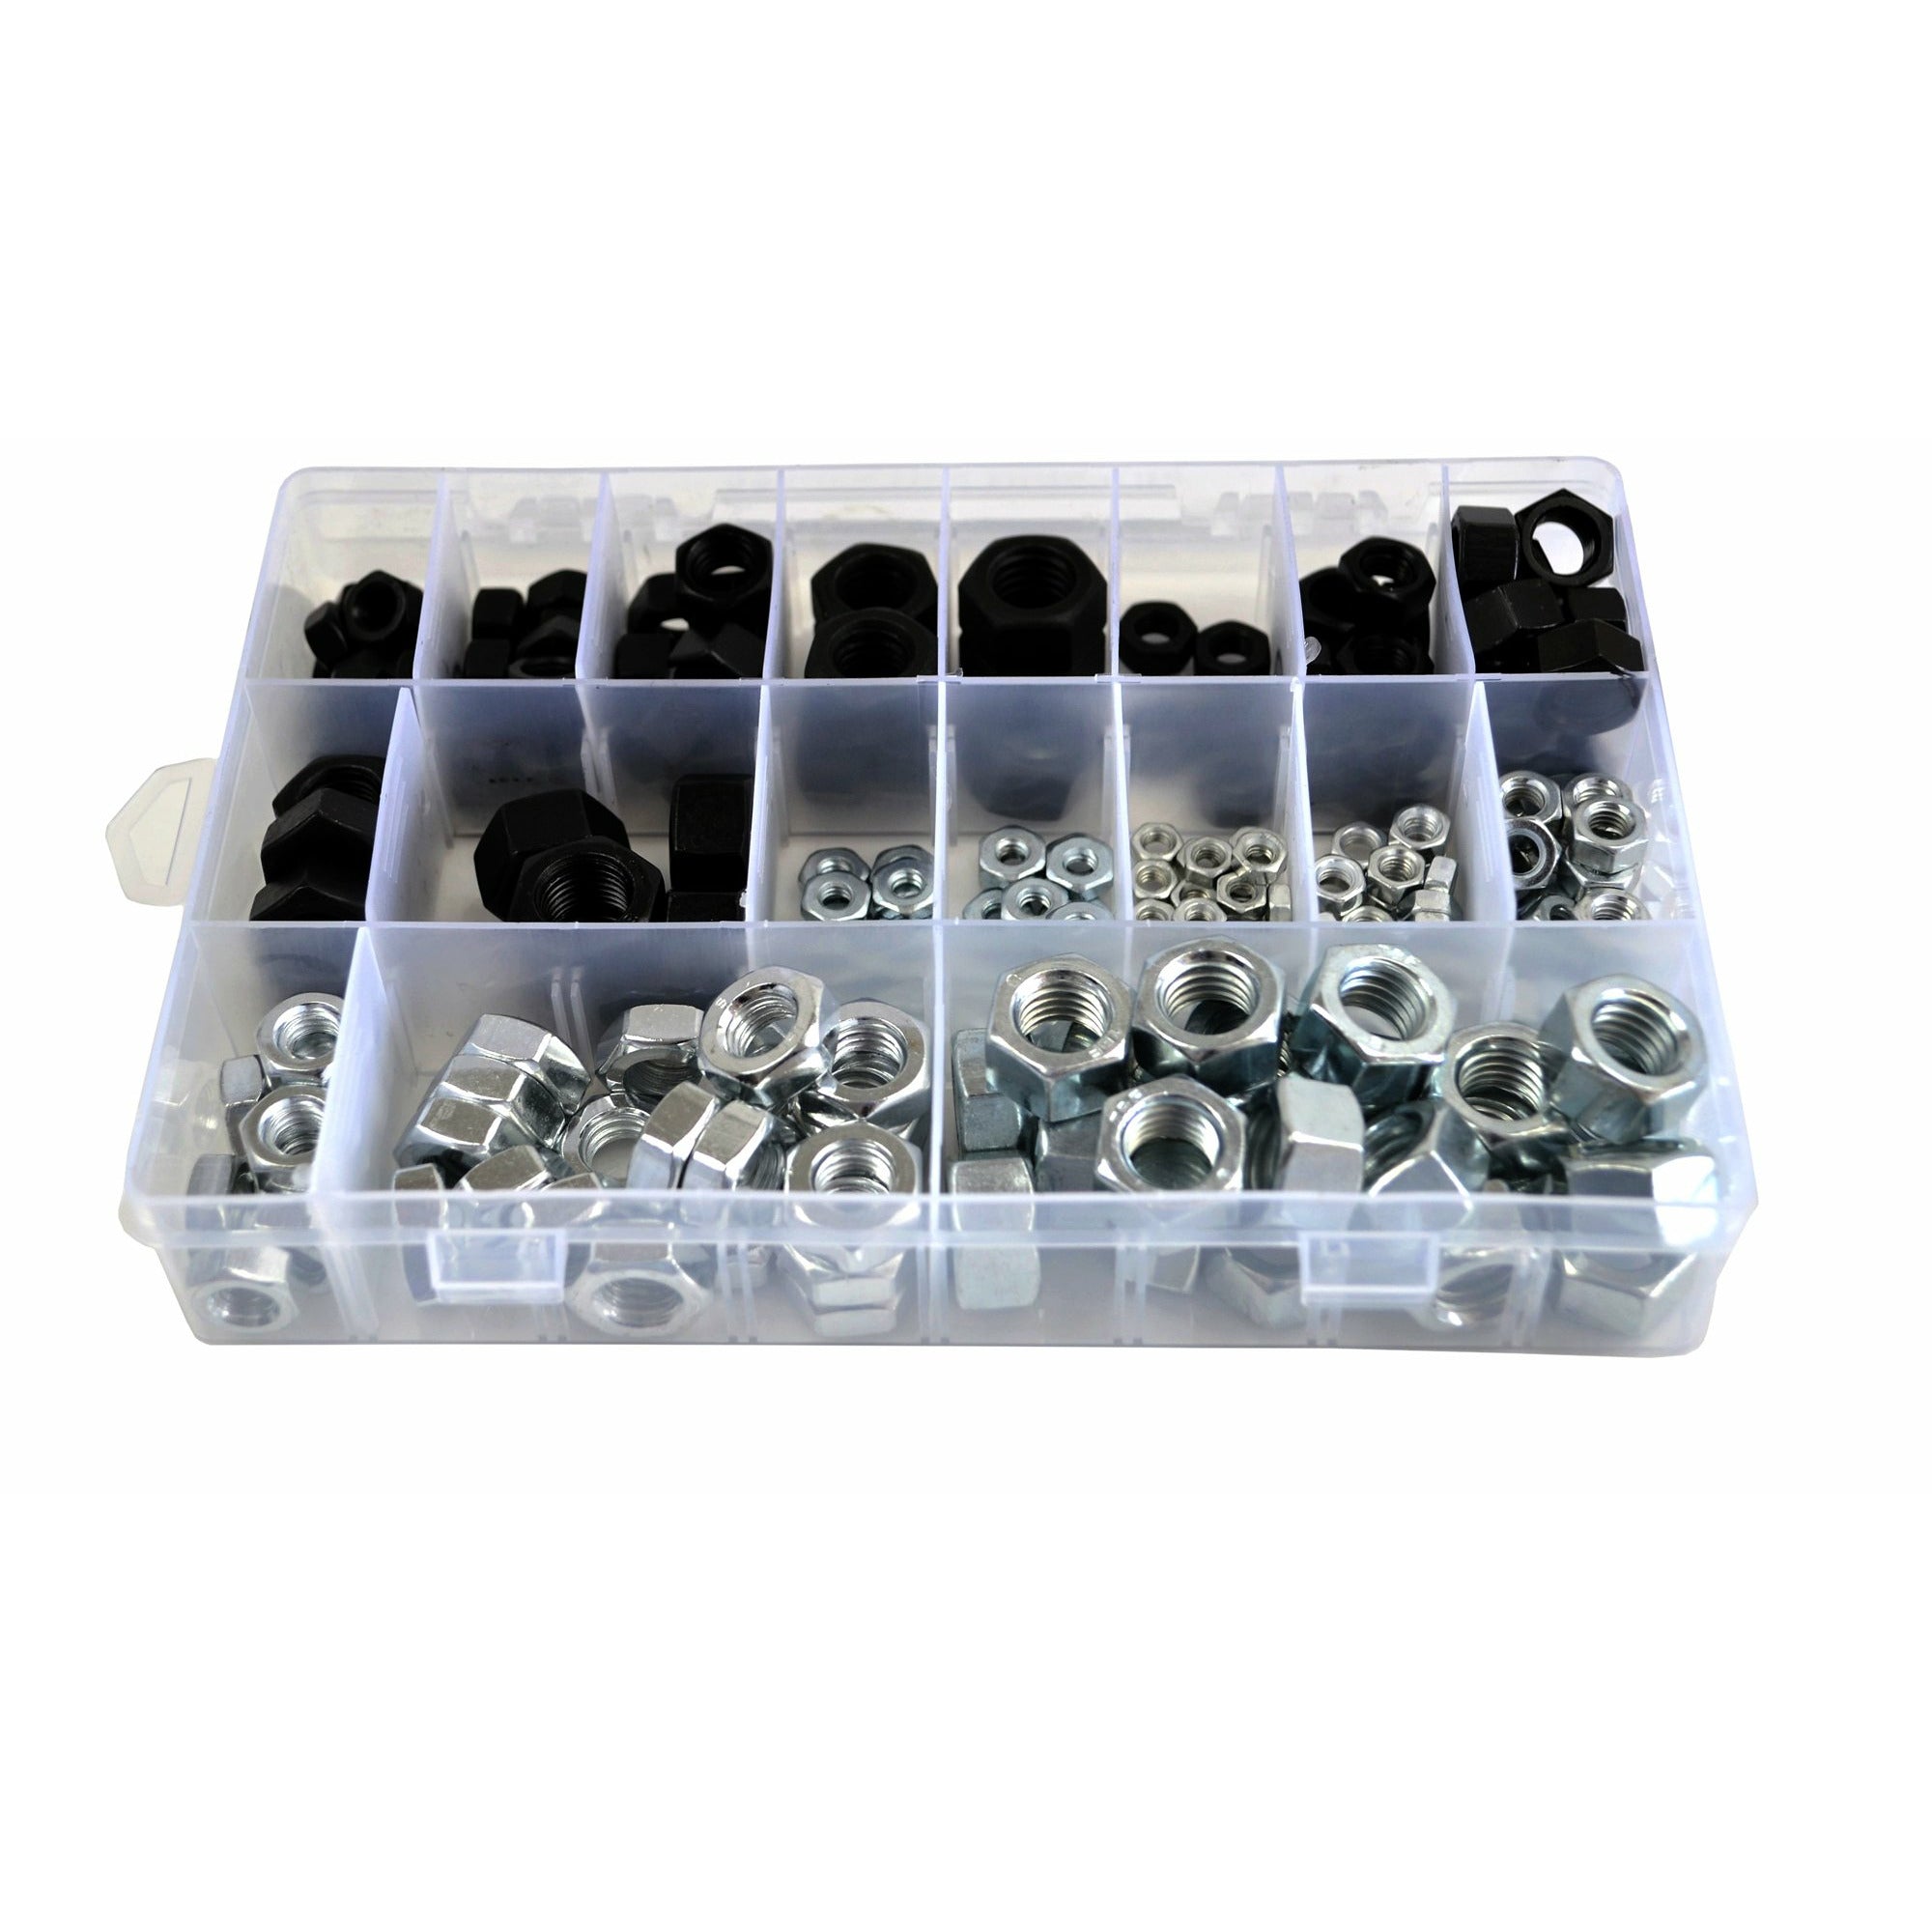 228 Piece Imperial Metric Nut Kit and 255 Piece Metric Nylock Nut Grab Kit Assortment